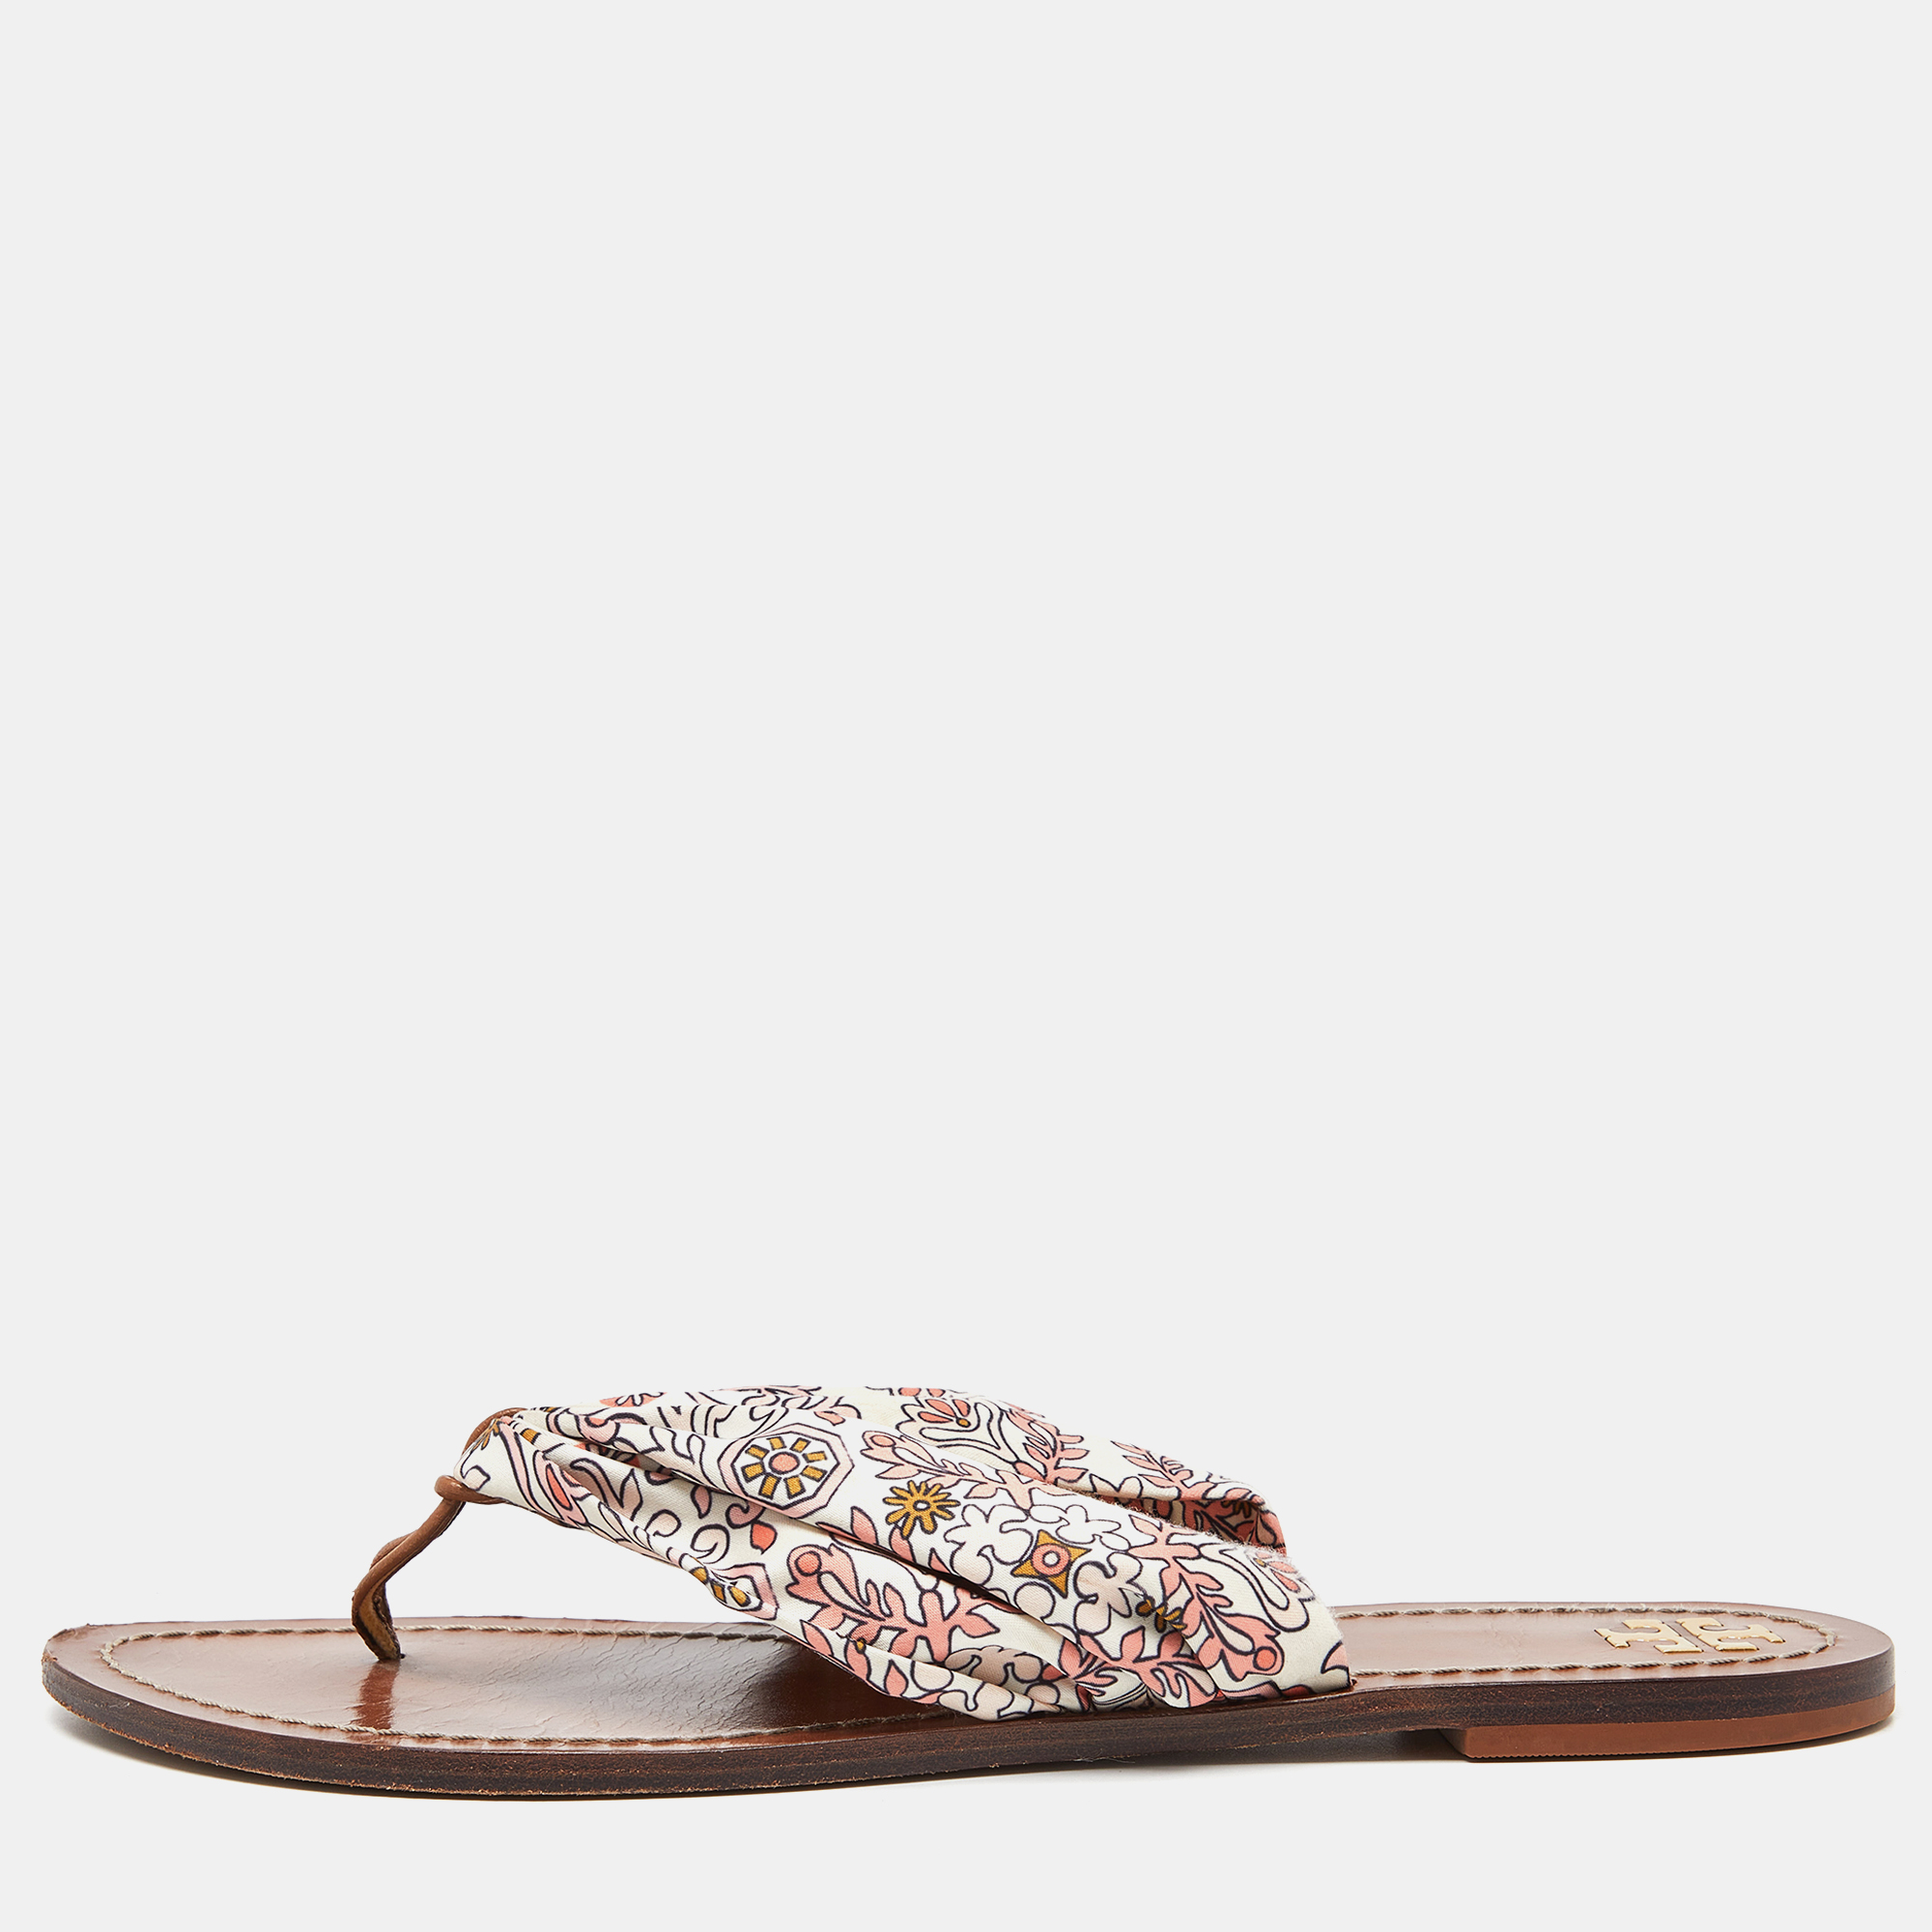 Tory burch multicolor print satin carson thong sandals size 41